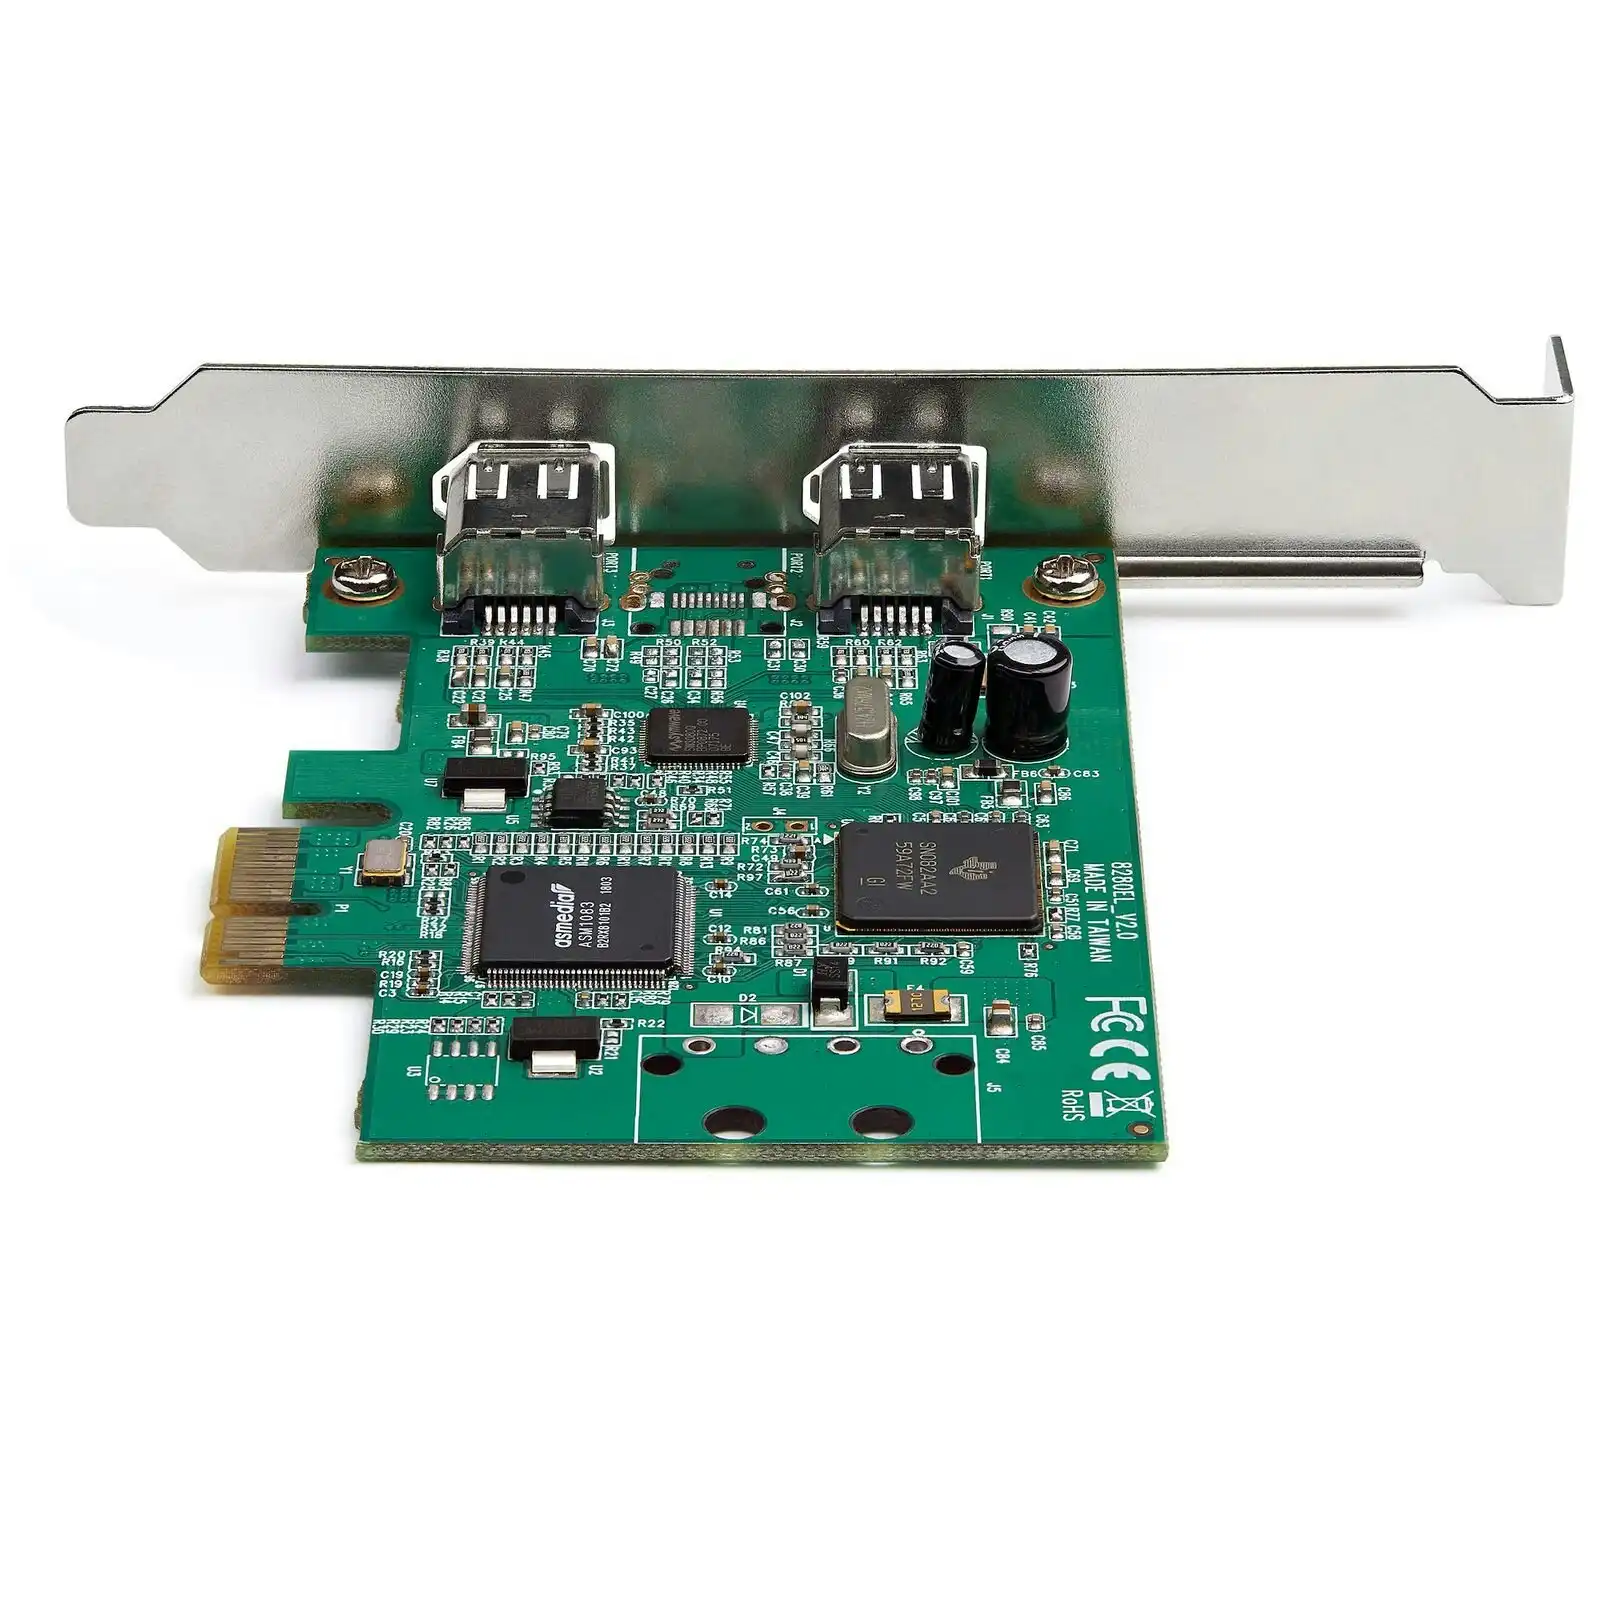 Star Tech 2-Port PCI Express 1394A 6-Pin FireWire Adapter Expansion Card for PC